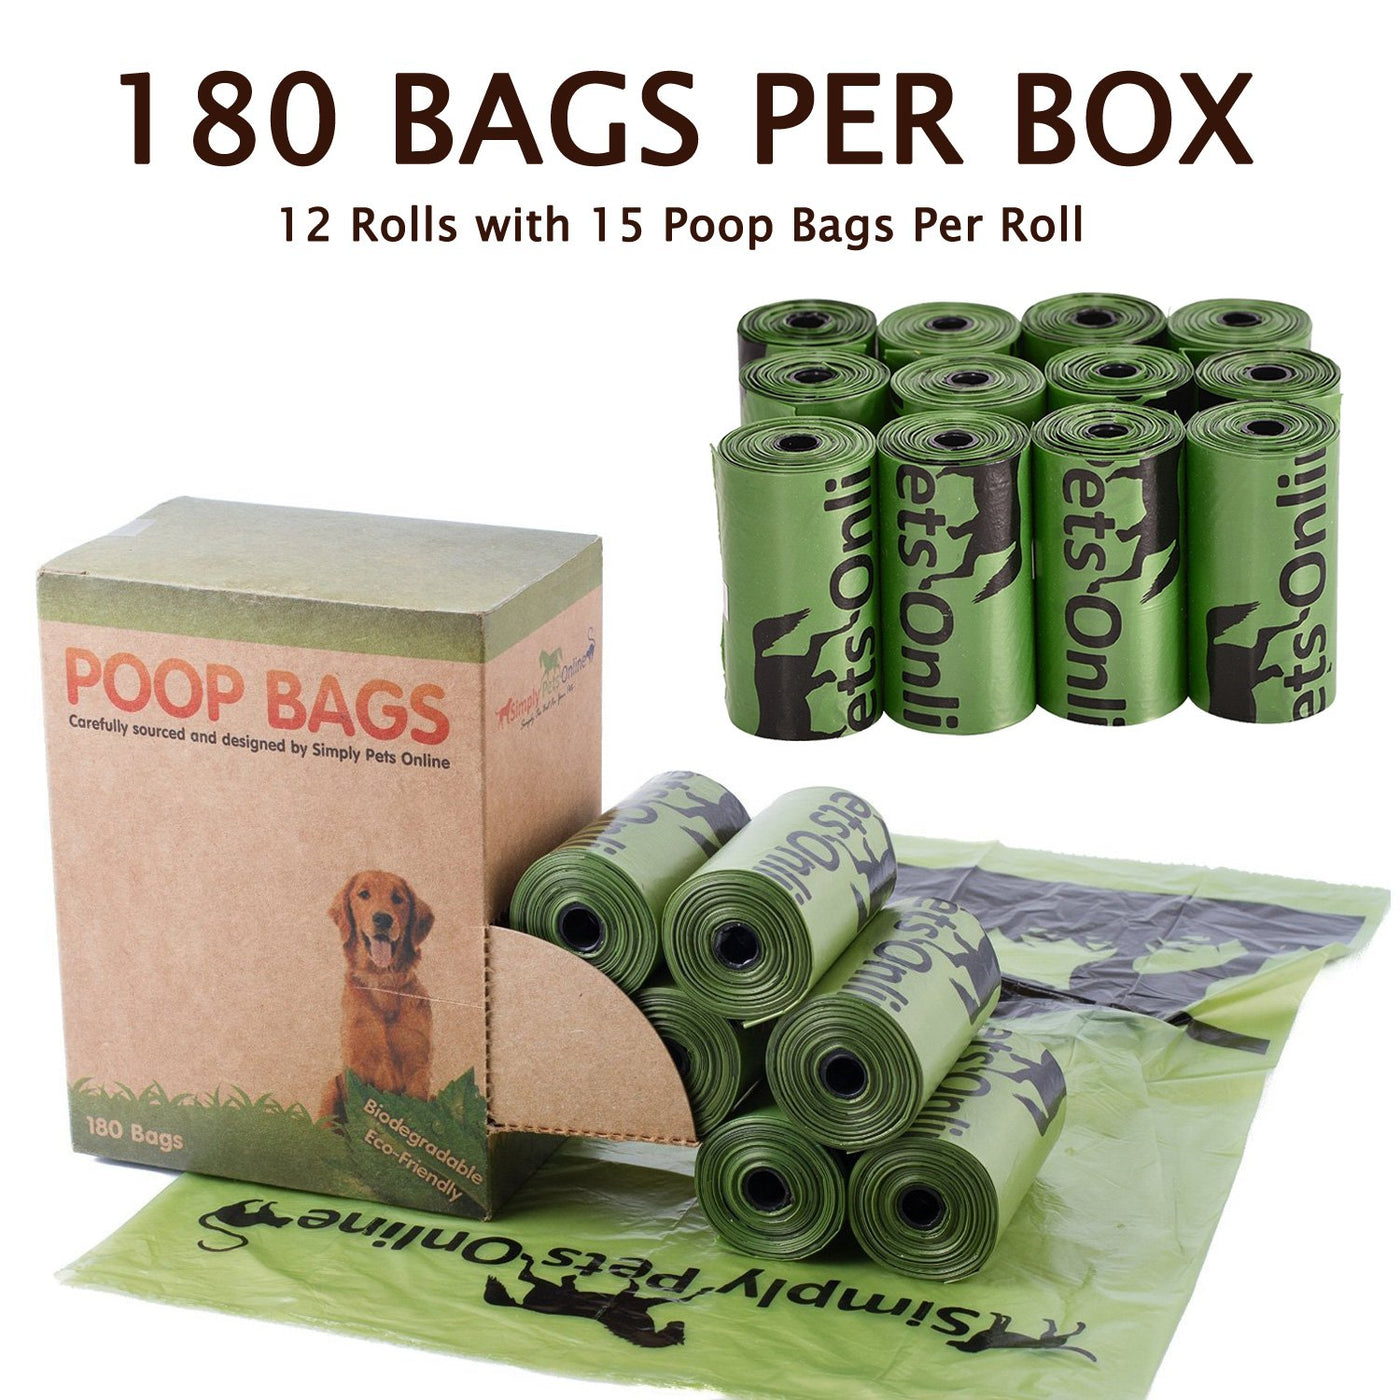 Simply Pets Online Biodegradable 180 Dog Poo Bags 12 Rolls with 15 Poop Bags Per Roll. Designed By 2 Vets These 100% recyclable Dog Dirt Bags Are Eco-friendly